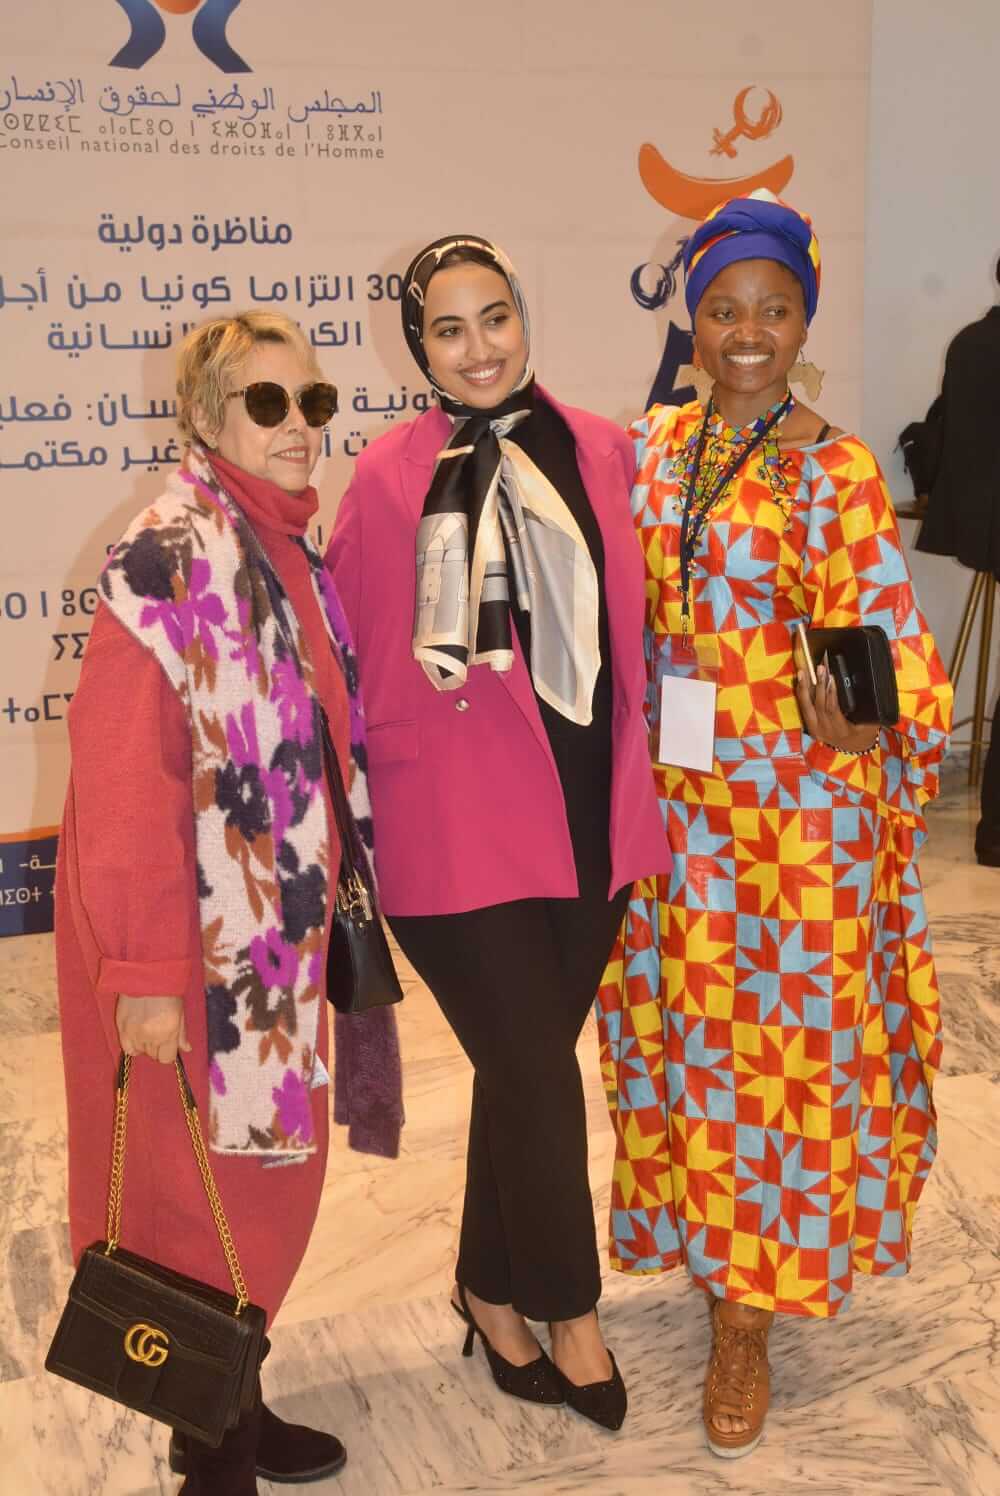 Nomawele Njongo: Advocate for Human Rights Shines on Global Stage at Morocco Symposium